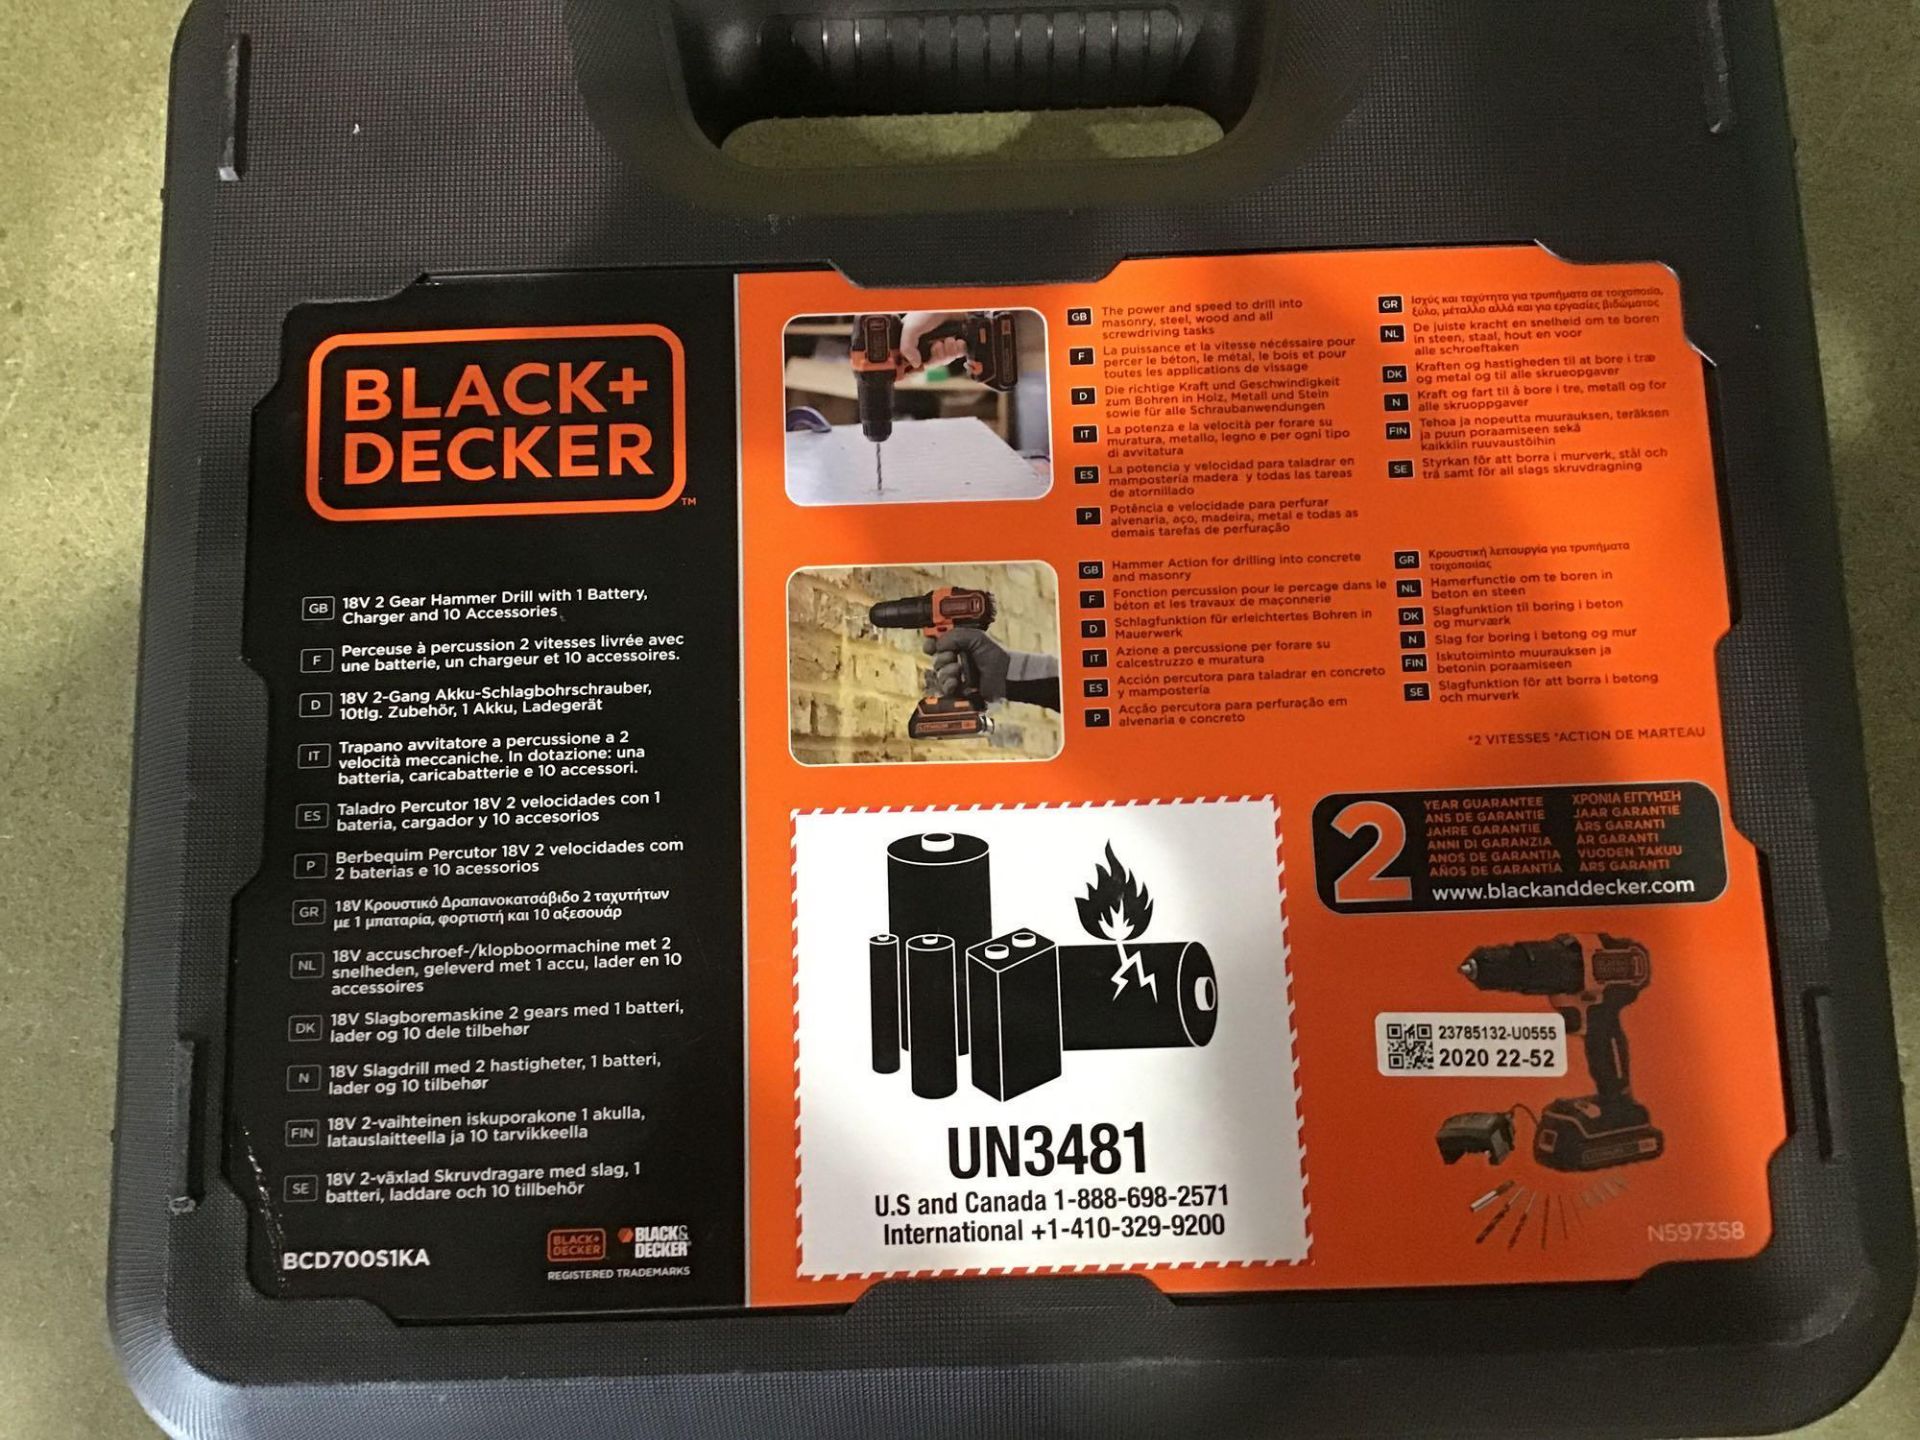 Black + Decker Cordless Hammer Drill with Battery - 18V - £50.00 RRP - Image 2 of 3